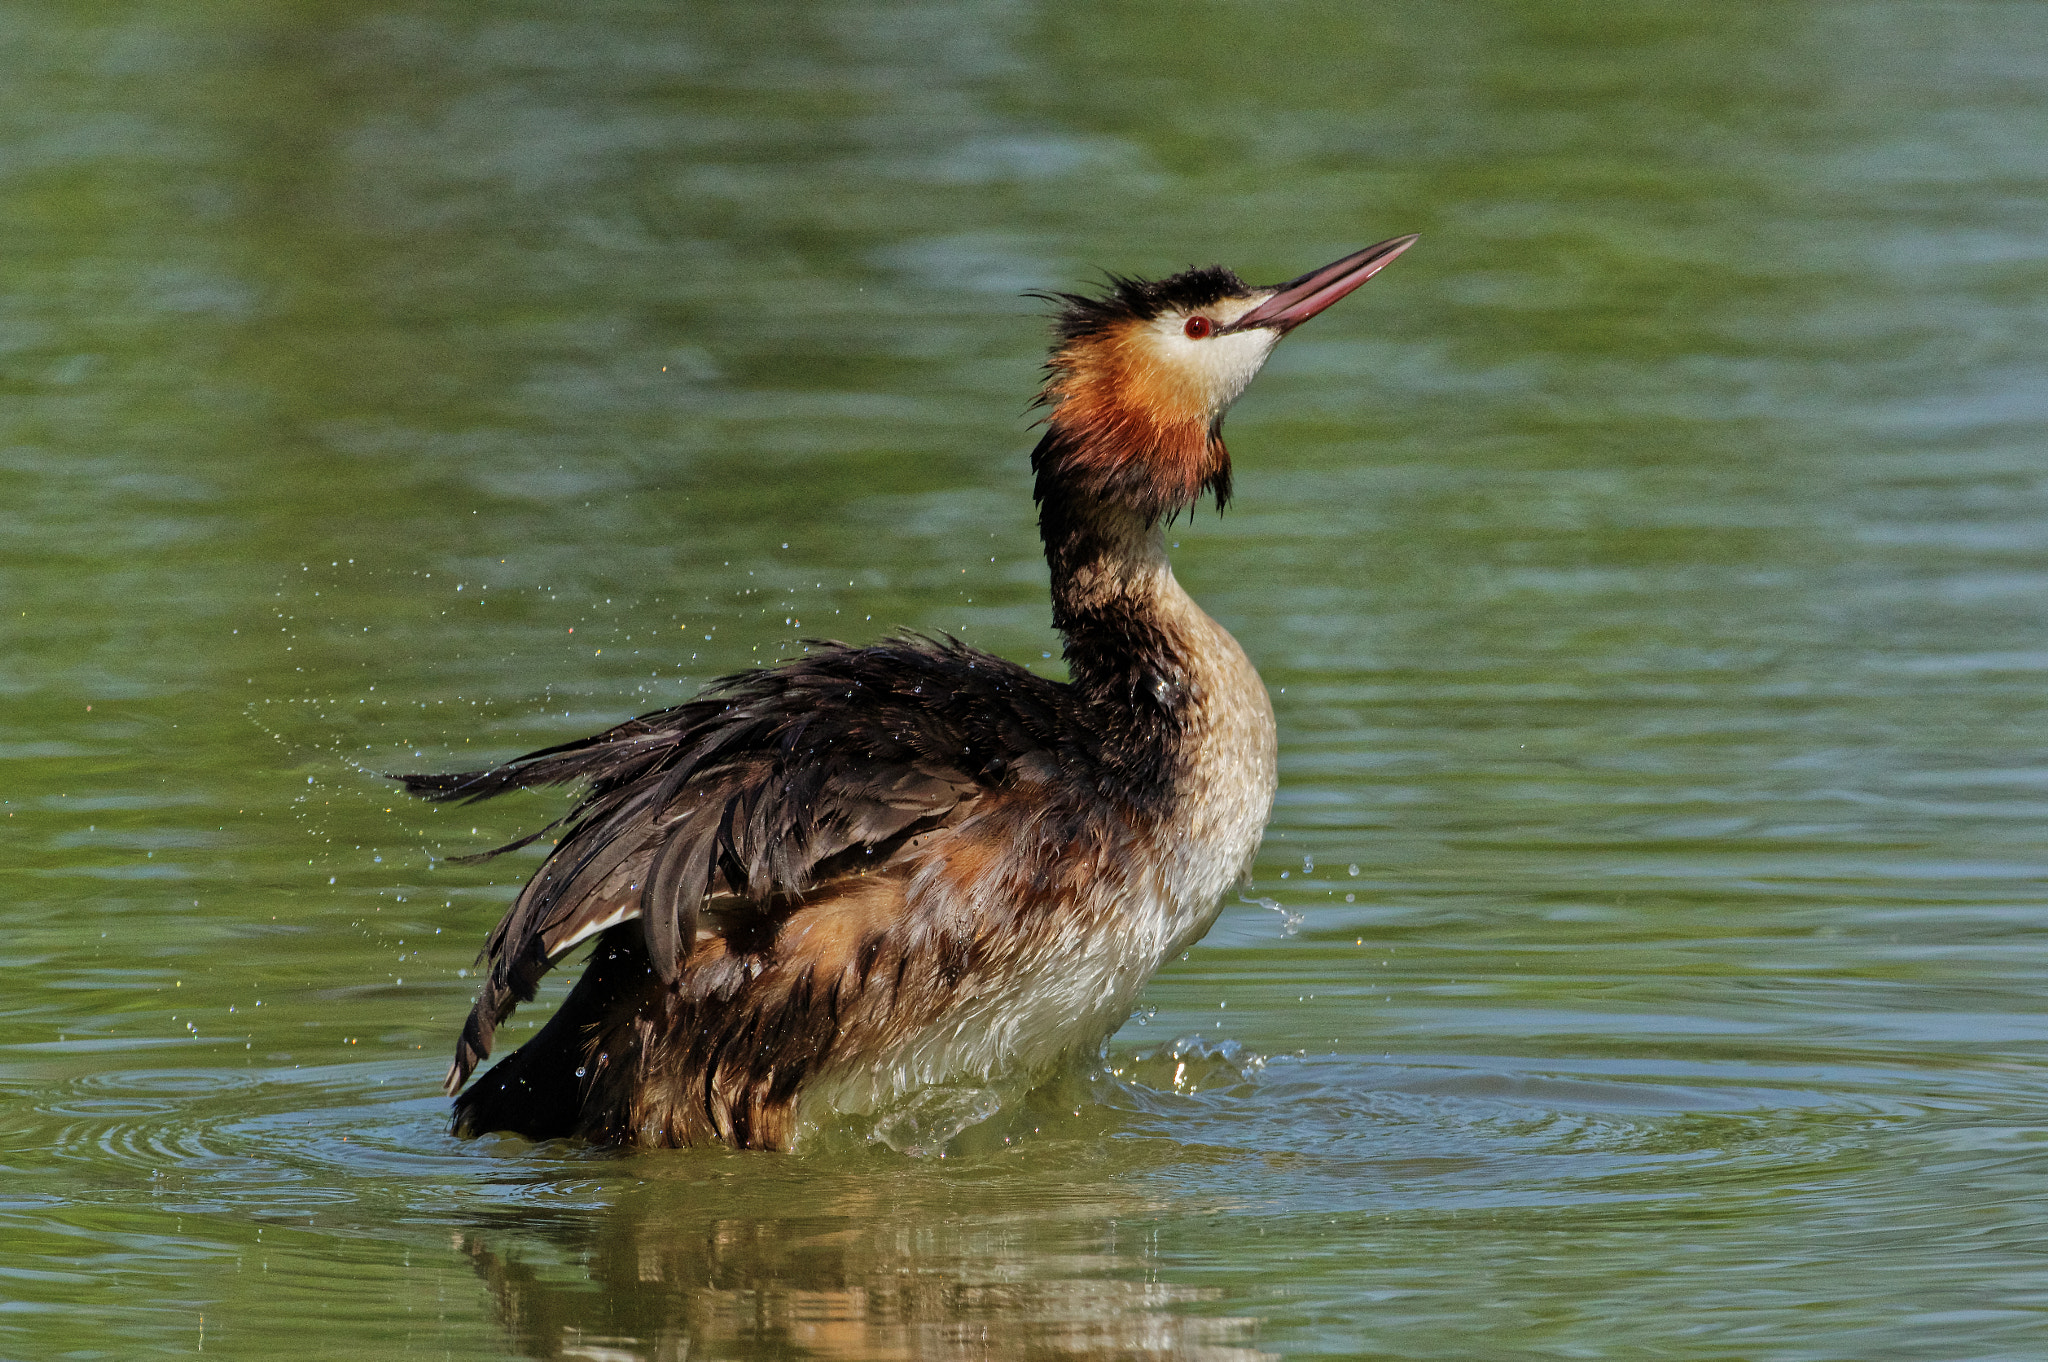 Pentax K-3 sample photo. Great crested grebe - svasso maggiore photography